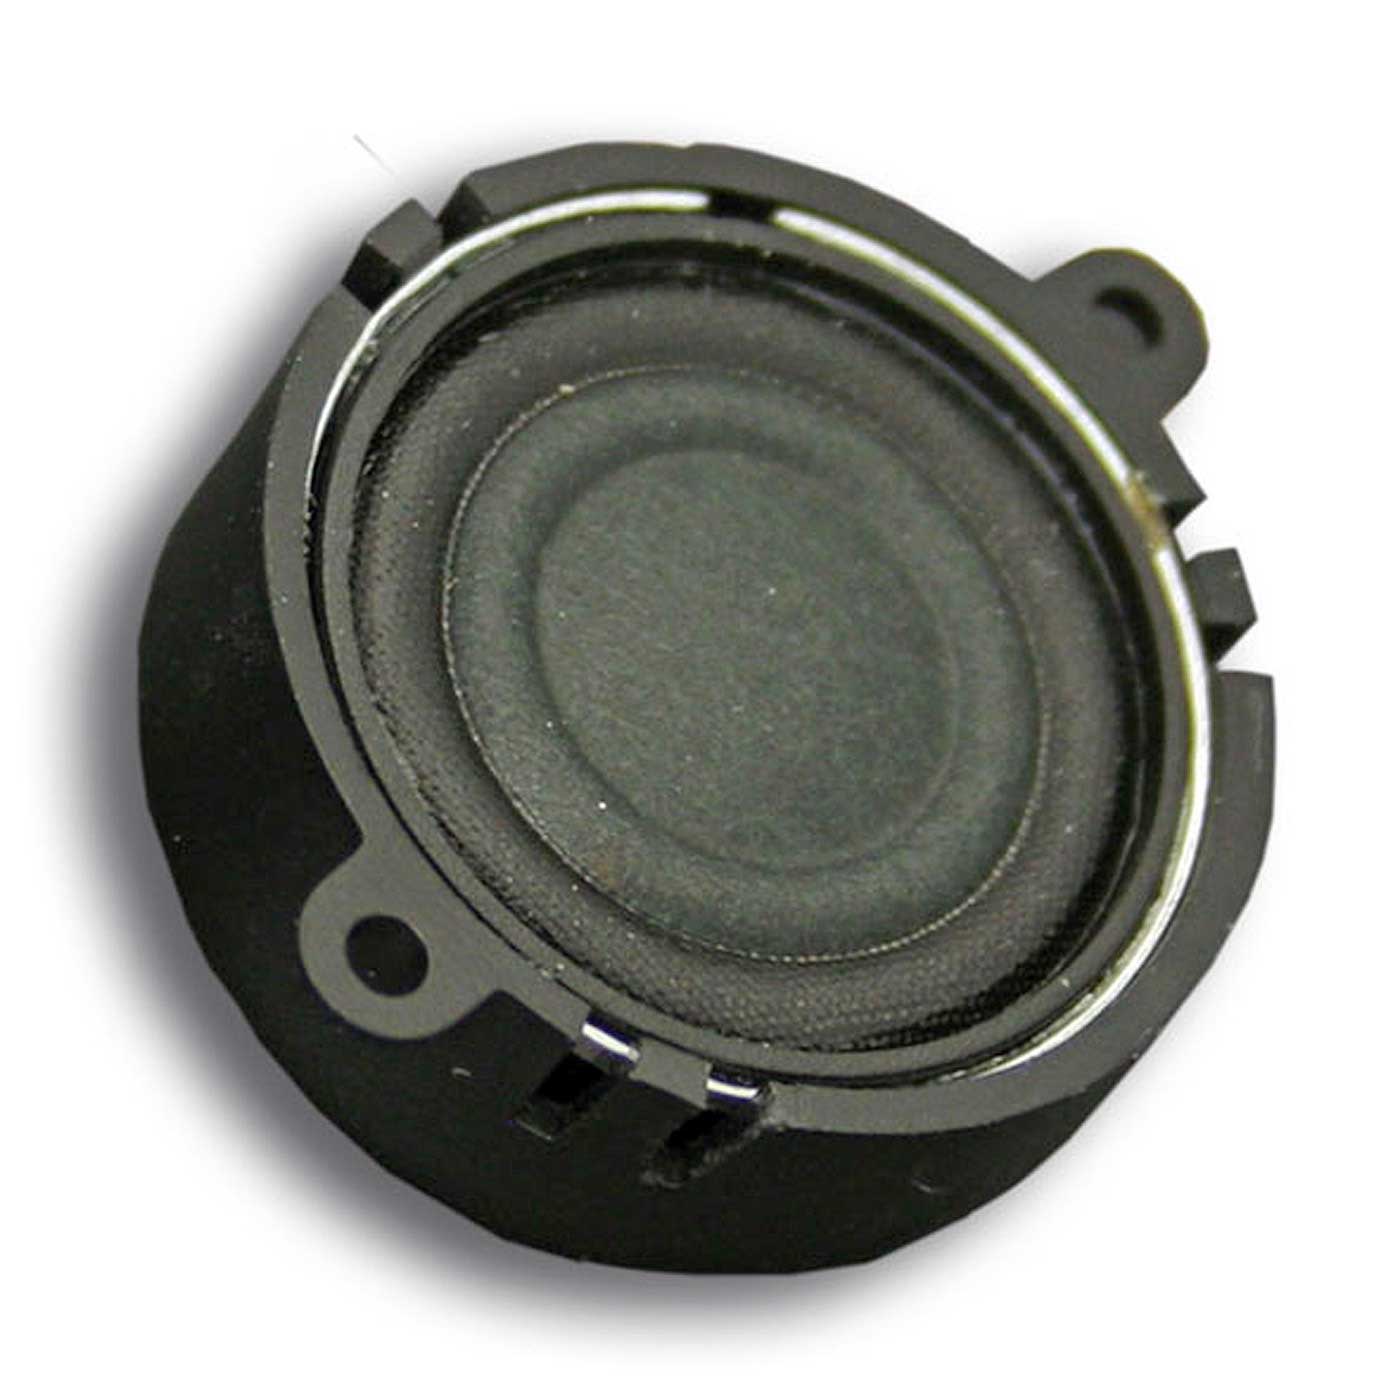 50332 Loudspeaker 23mm round, 4 Ohms with Sound Chamber - Click Image to Close